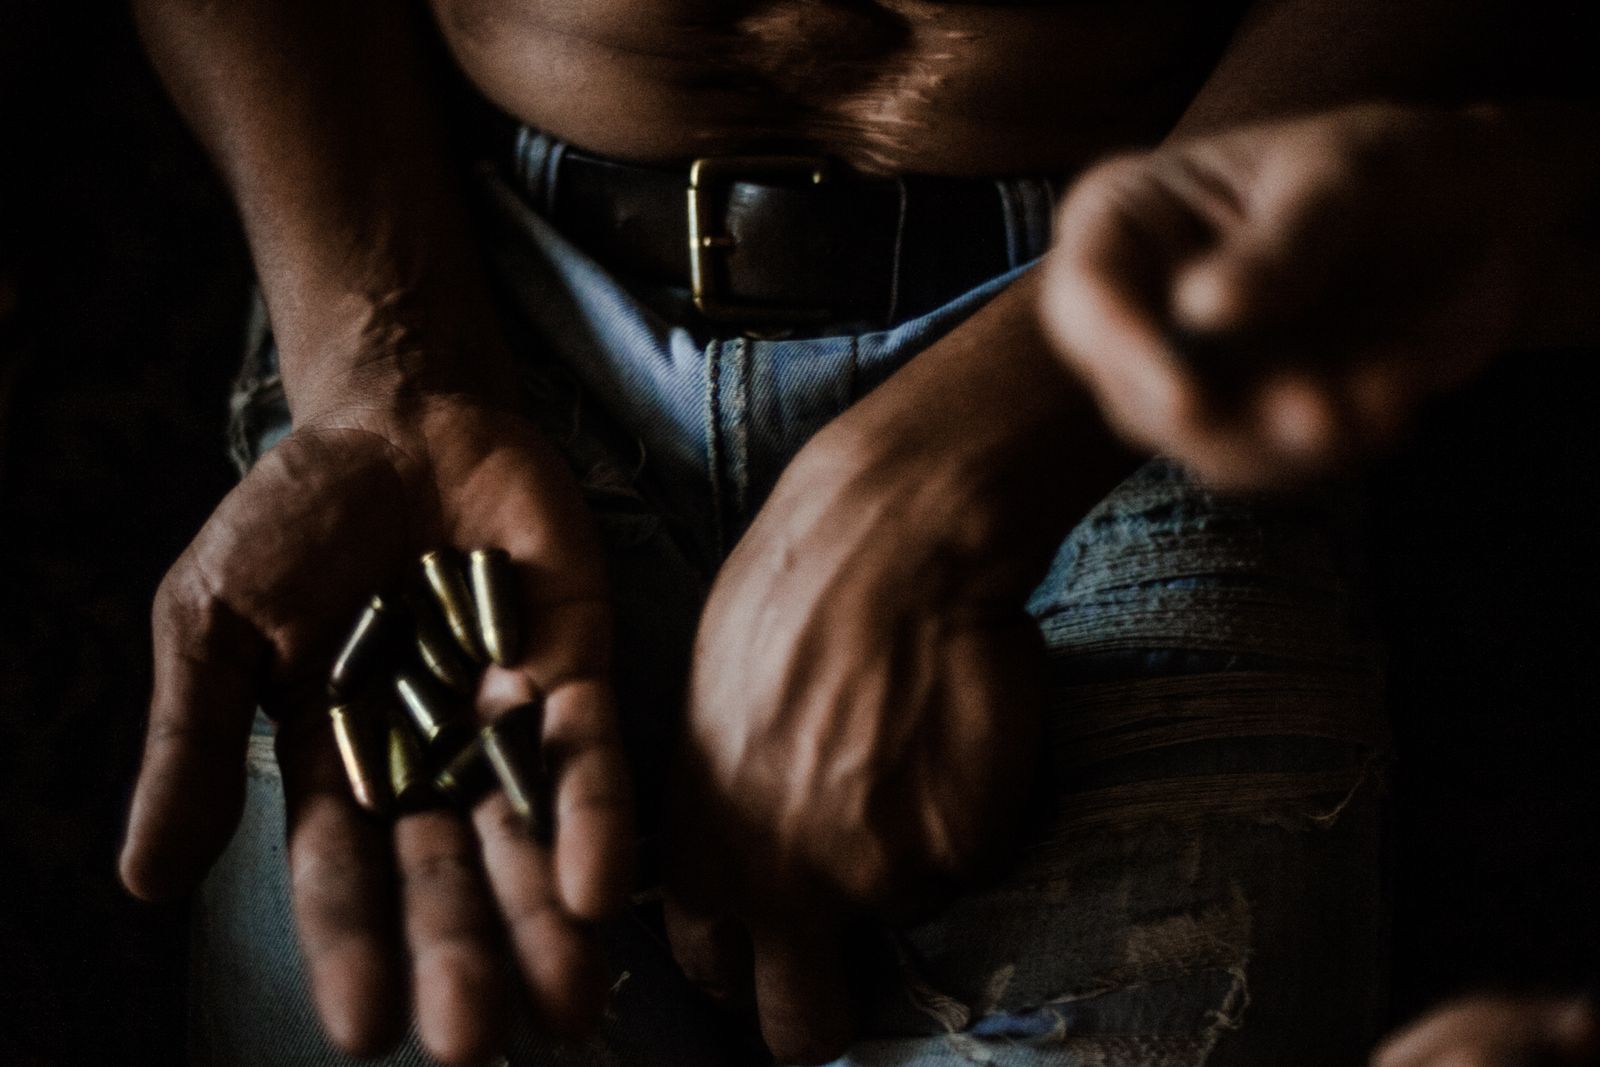 © Celine Croze - El Feo at home showing me his bullets after telling me that he survived 3 bullets in the belly. Caracas, Venezuela, 2015